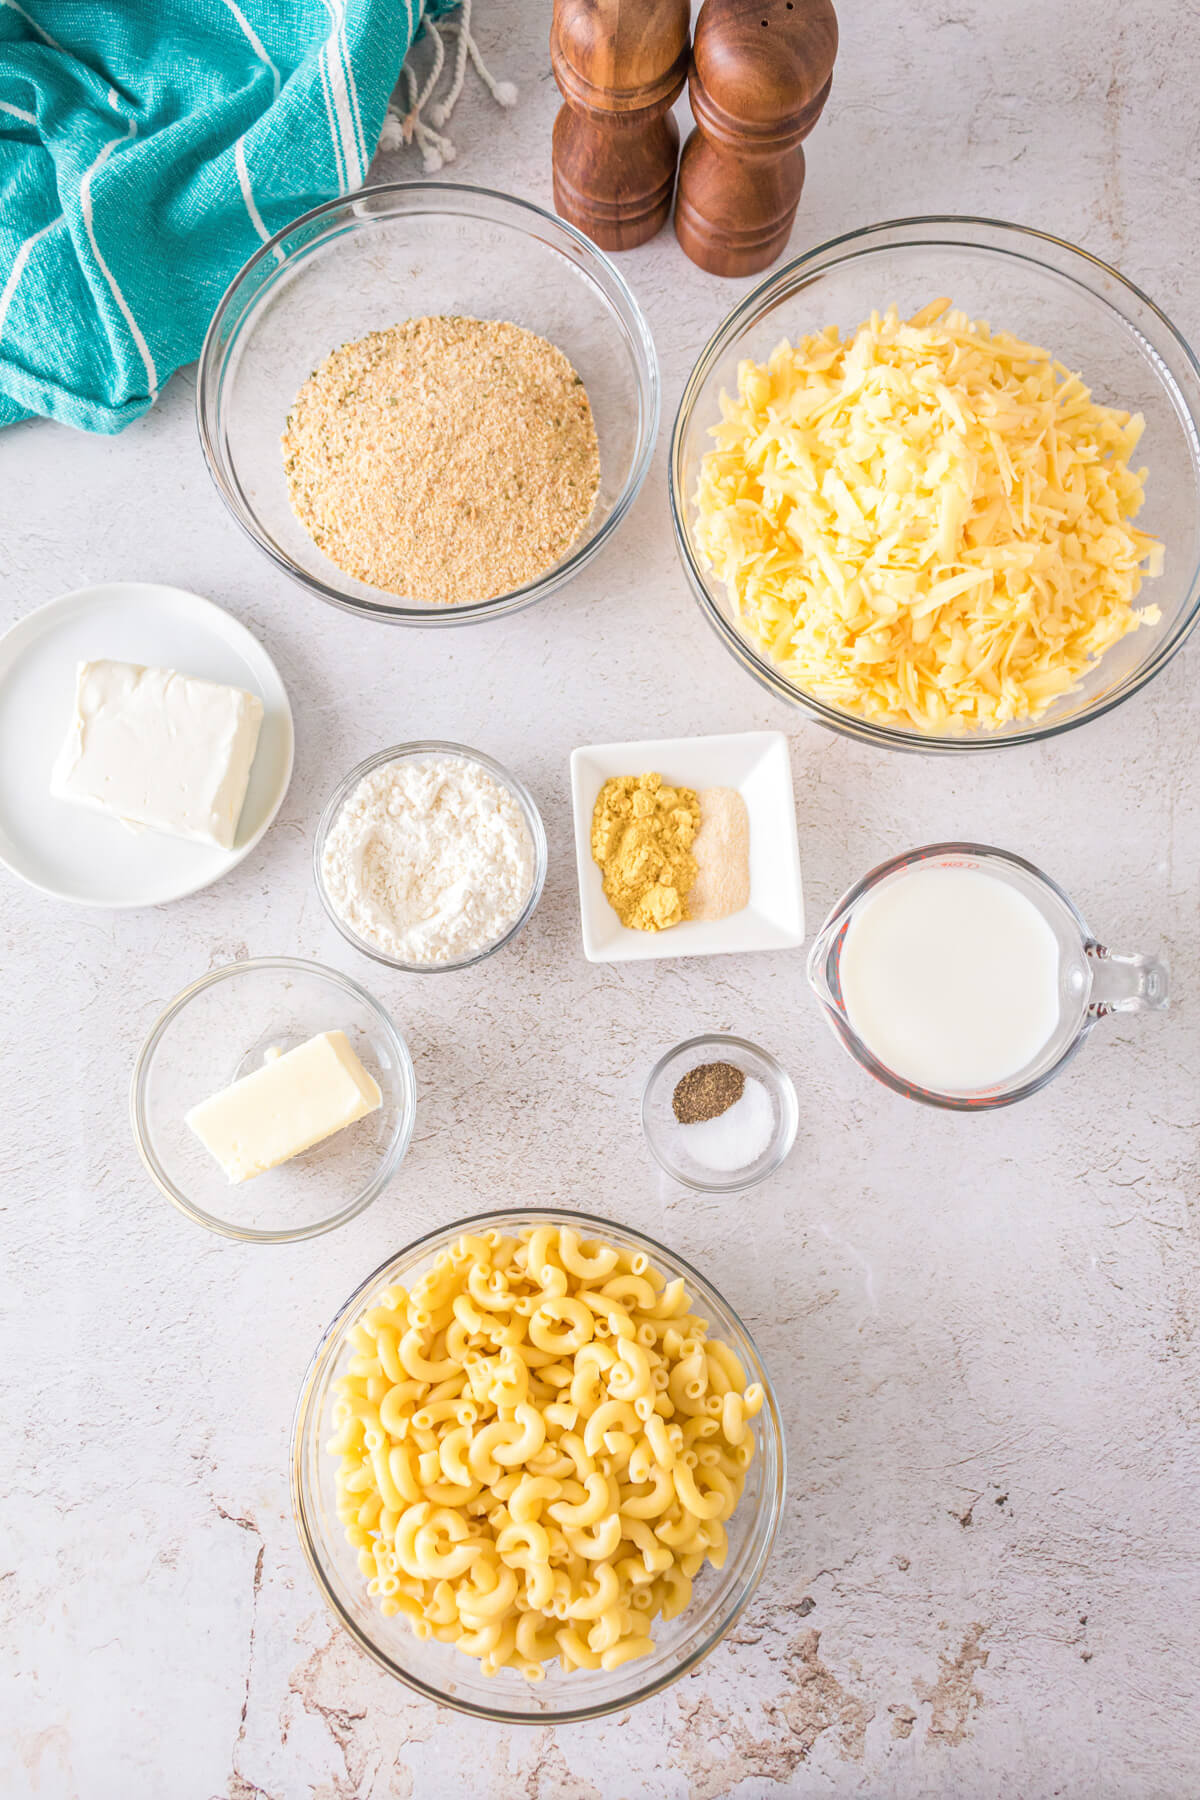 Ingredients required to make Smoked Mac and Cheese.